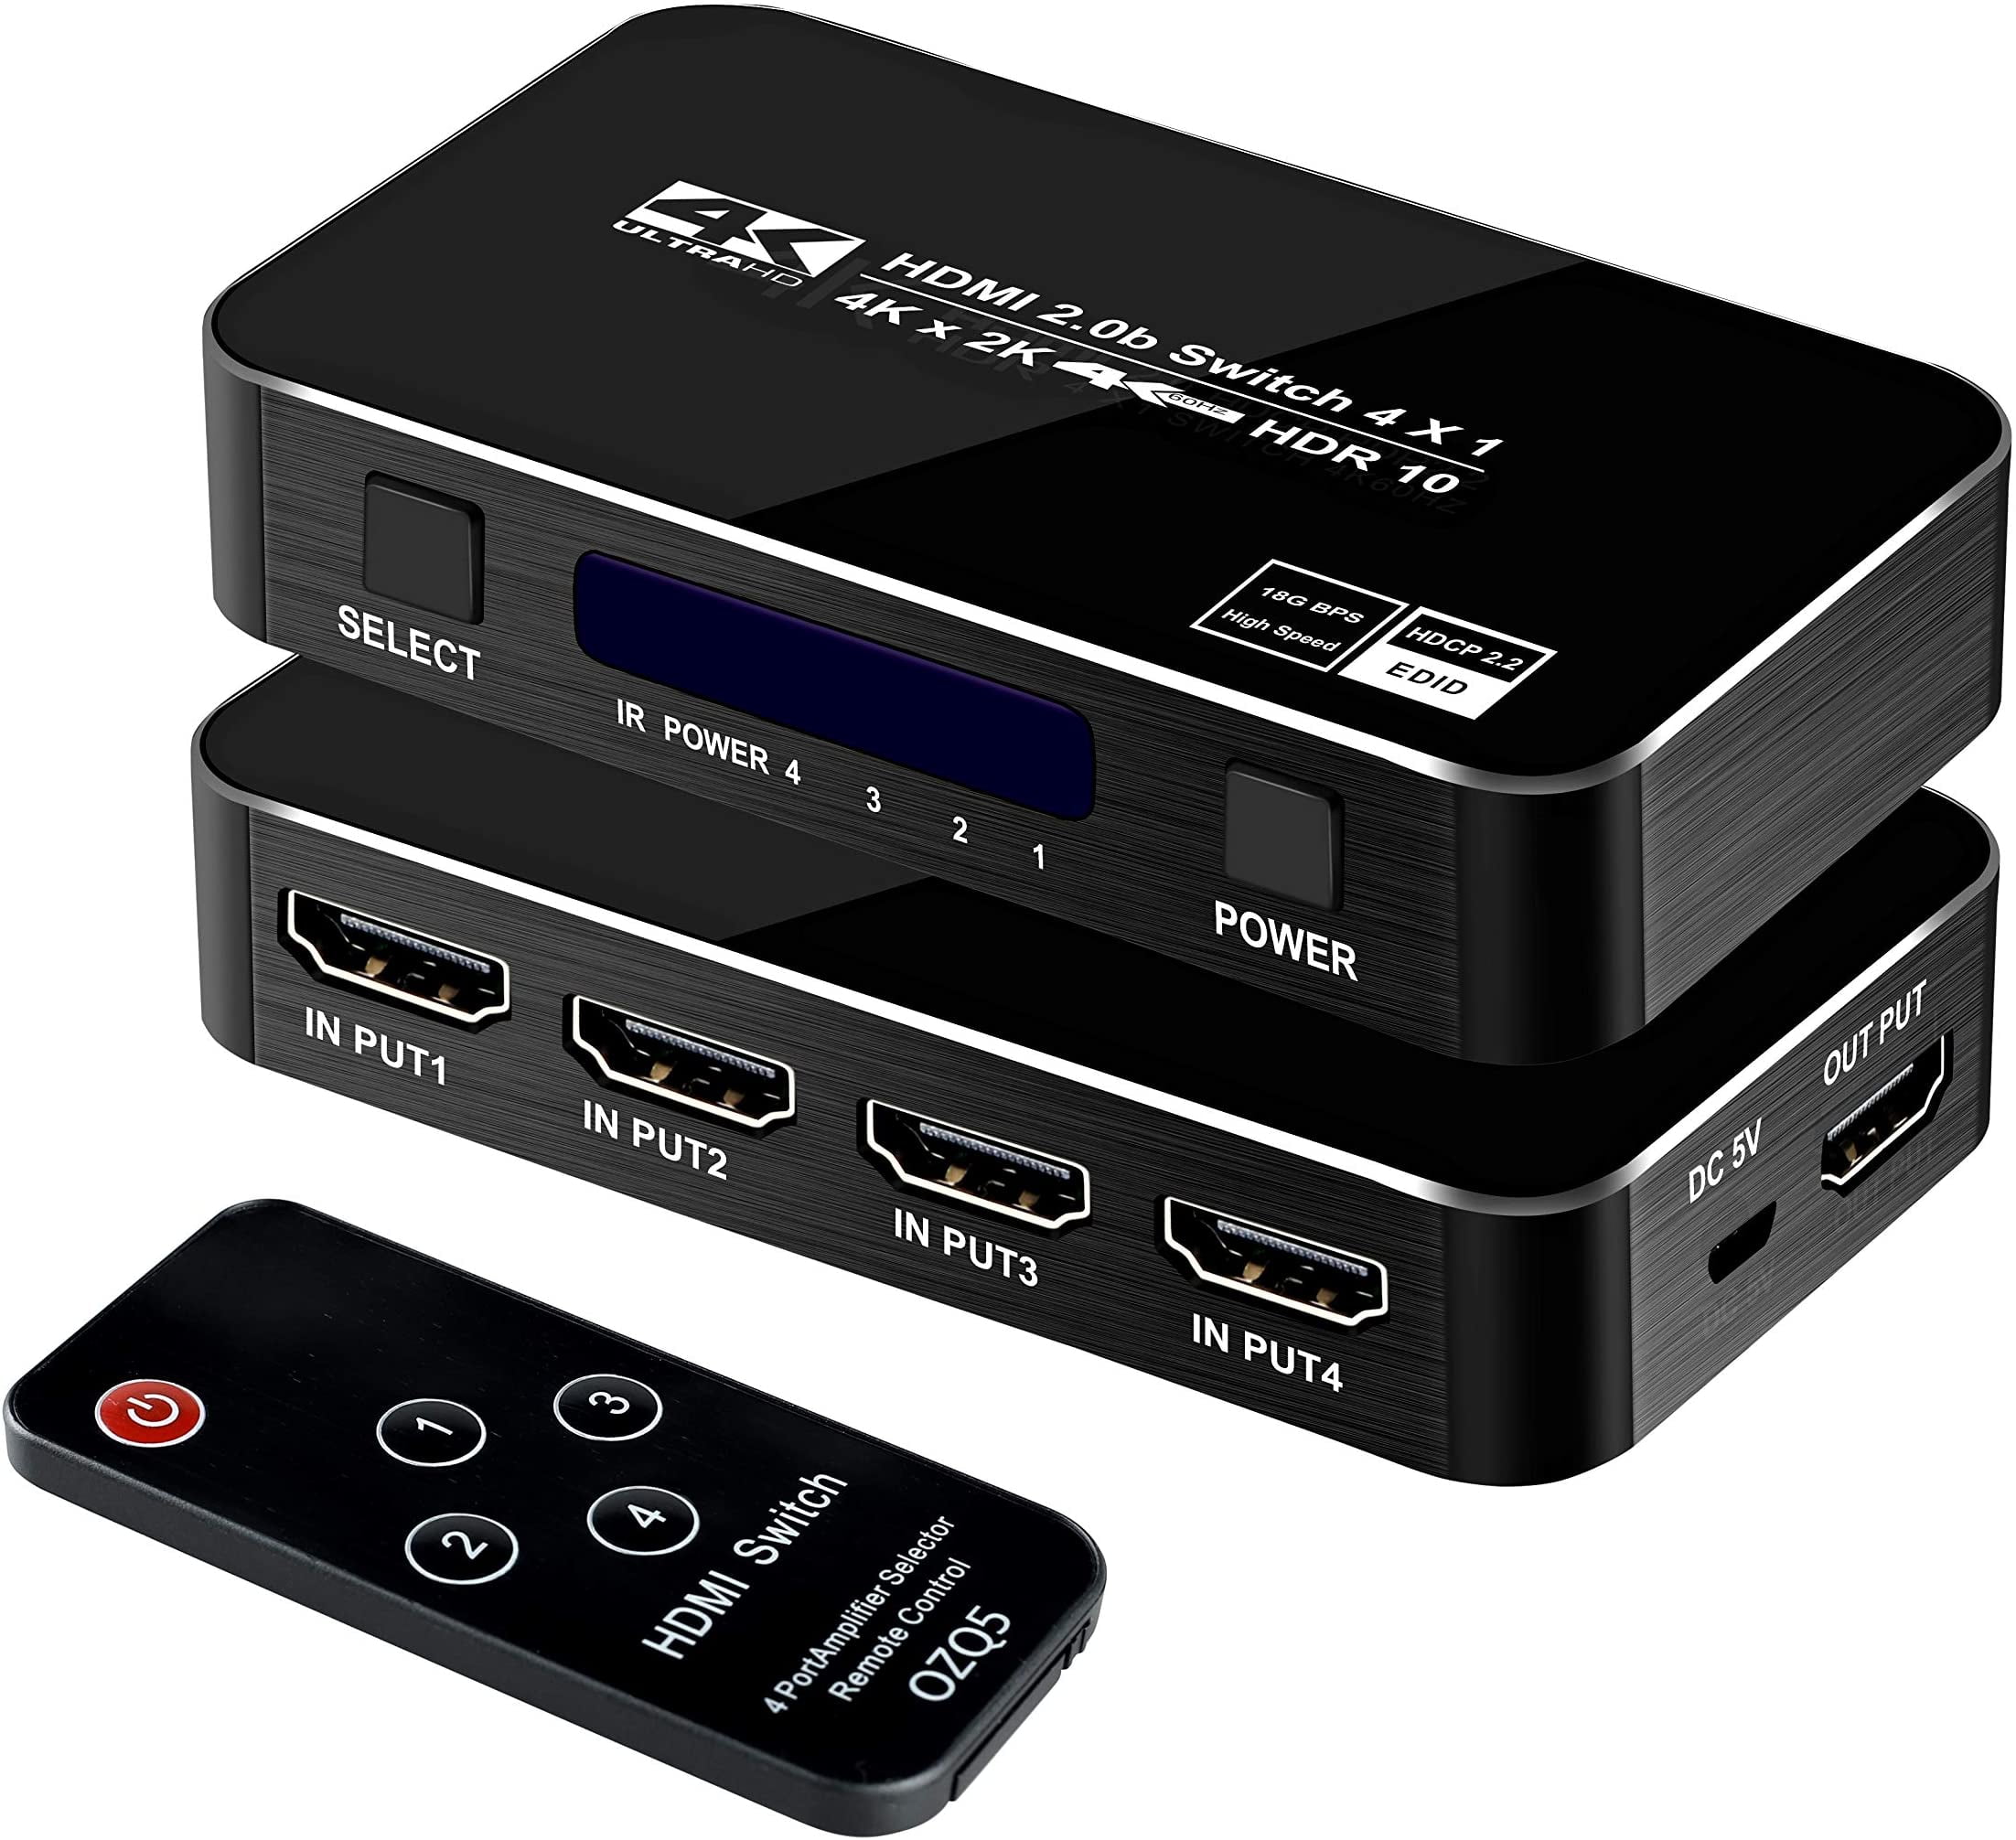 HDMI 2.0 Switch 4K 60Hz HDMI Switcher 4x1 BolAAzuL 4 Port HDMI Switch Box 4 in 1 Out HDMI Switcher with IR Remote Supports 3840X2160P 4K@60HZ HDCP 2.2 for TV Projector PC